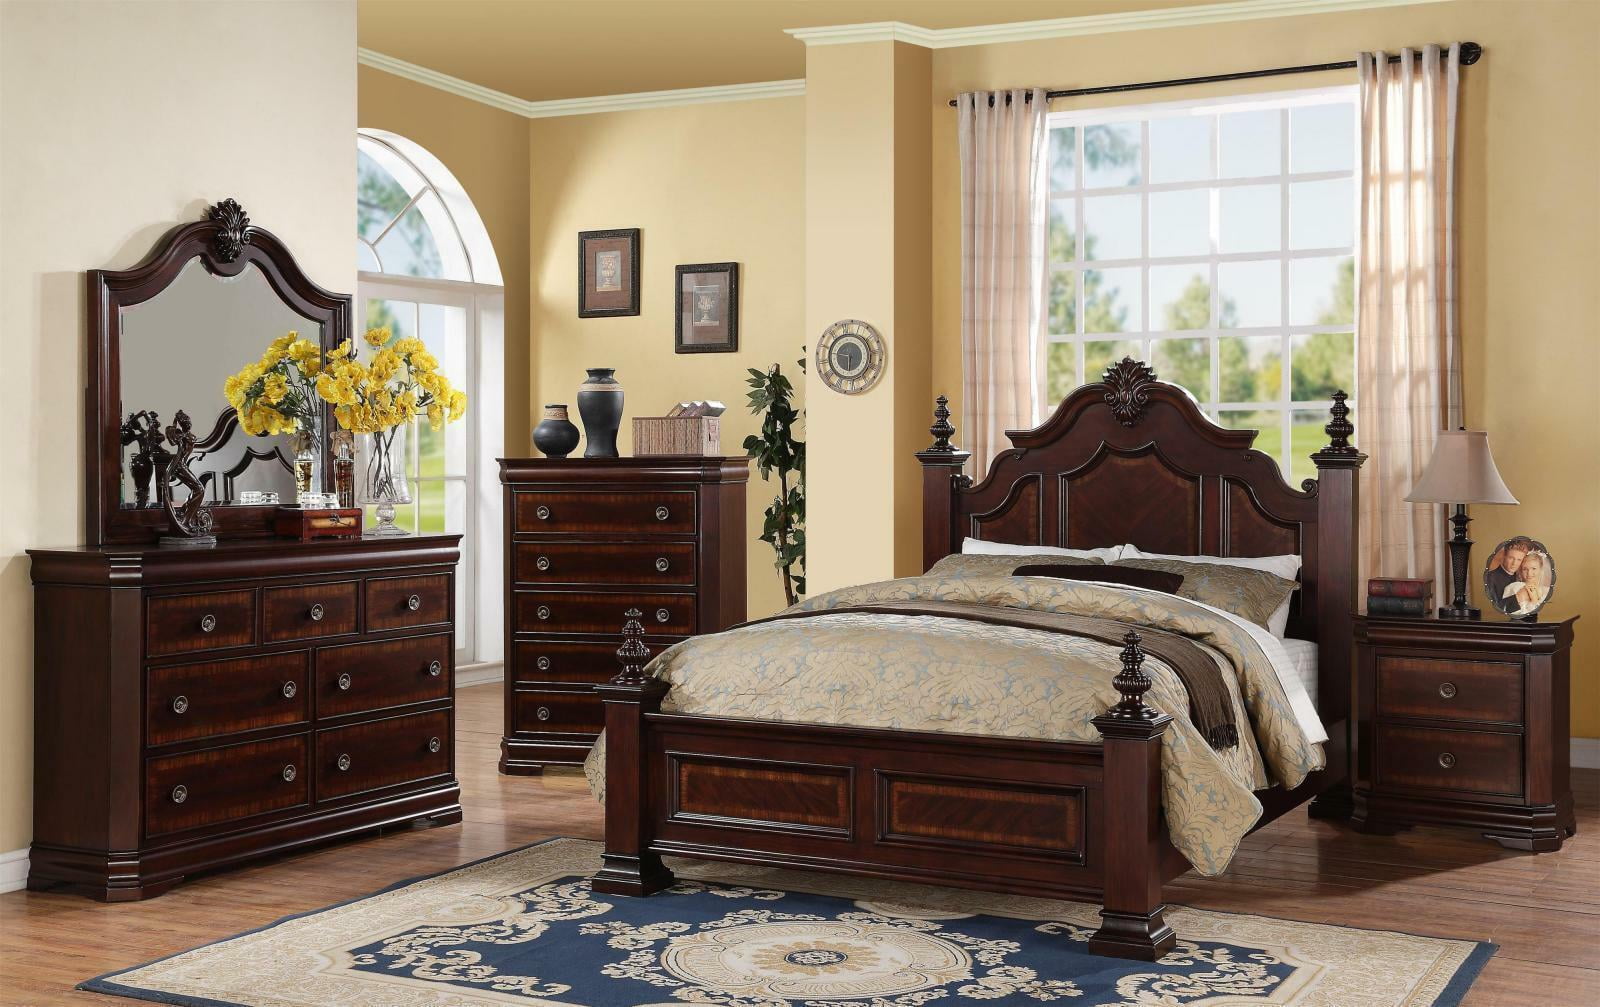 ready assembled solid wood bedroom furniture